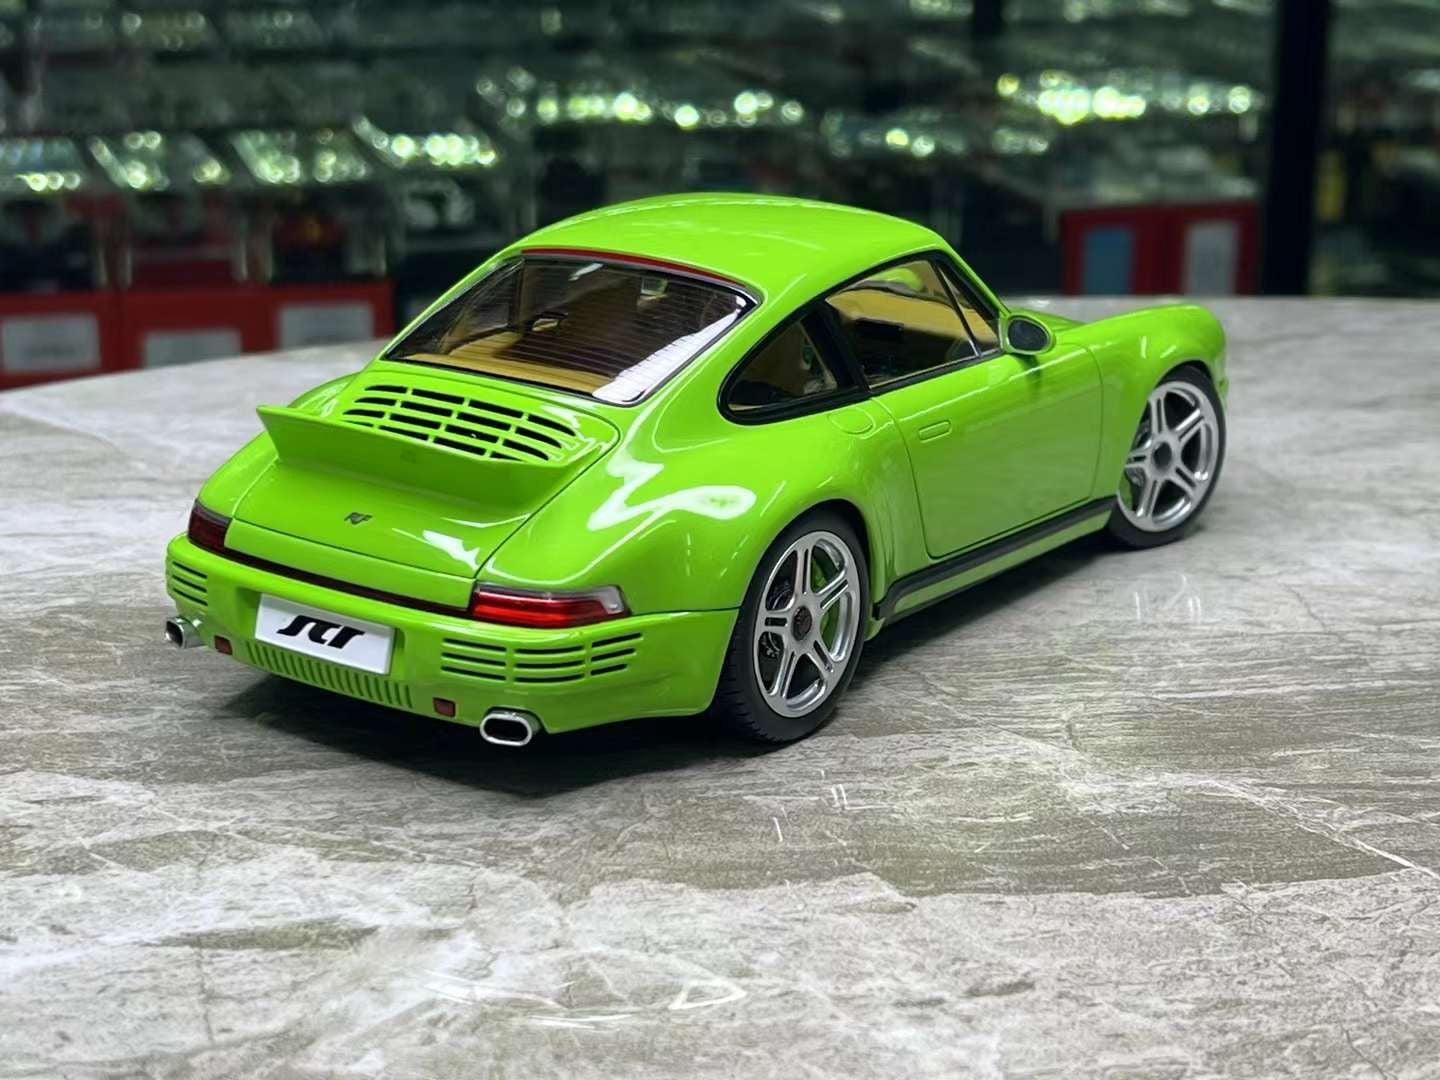 Almost Real 1/18 RUF SCR 2018